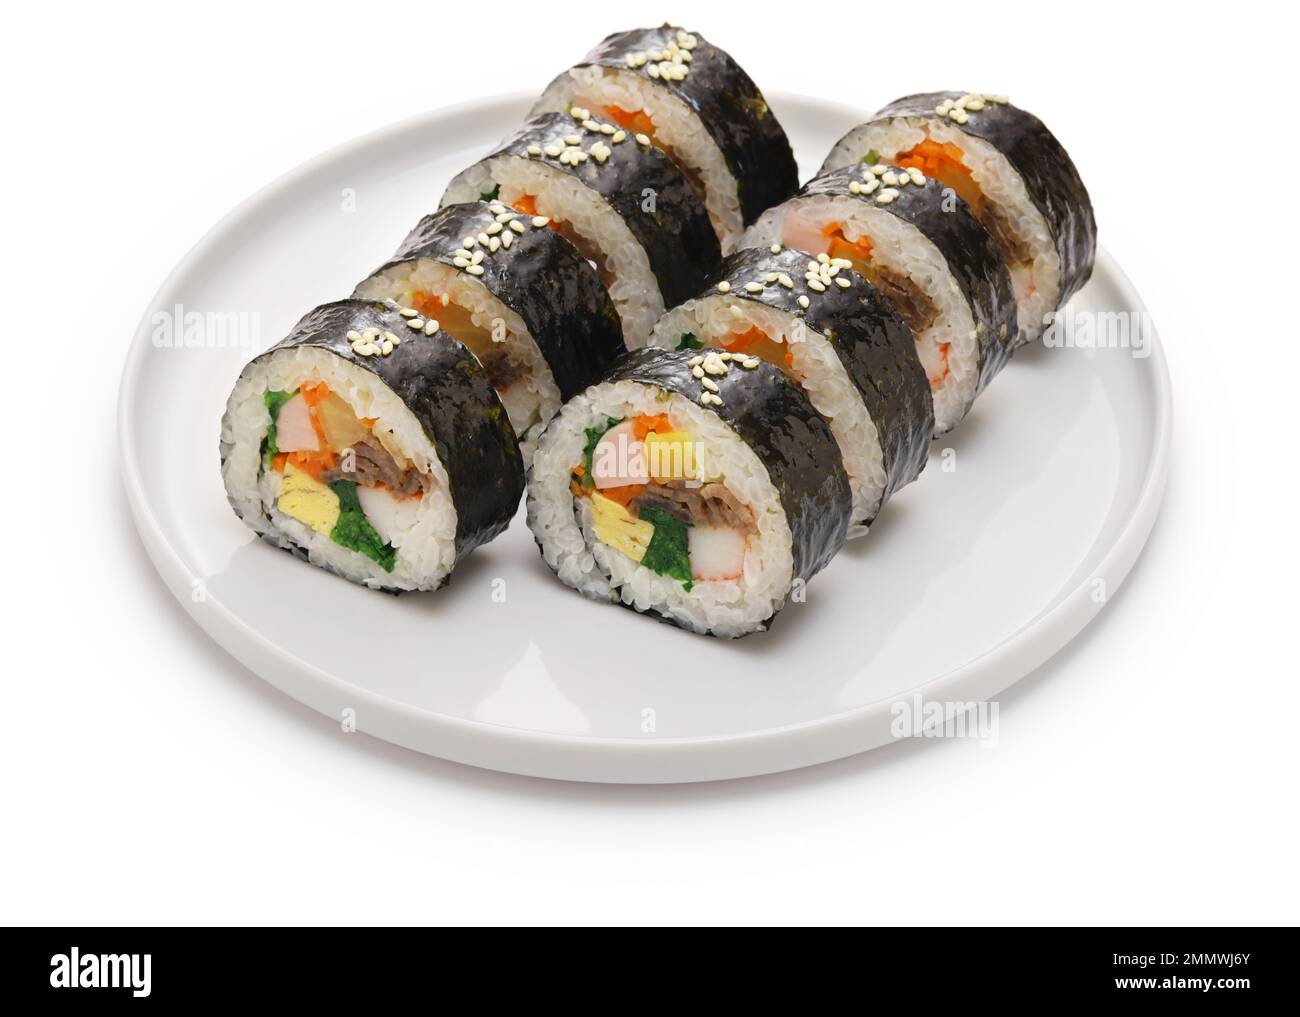 Gimbap is a Korean food consisting of rice and several ingredients seasoned with sesame oil and wrapped in nori seaweed. Stock Photo